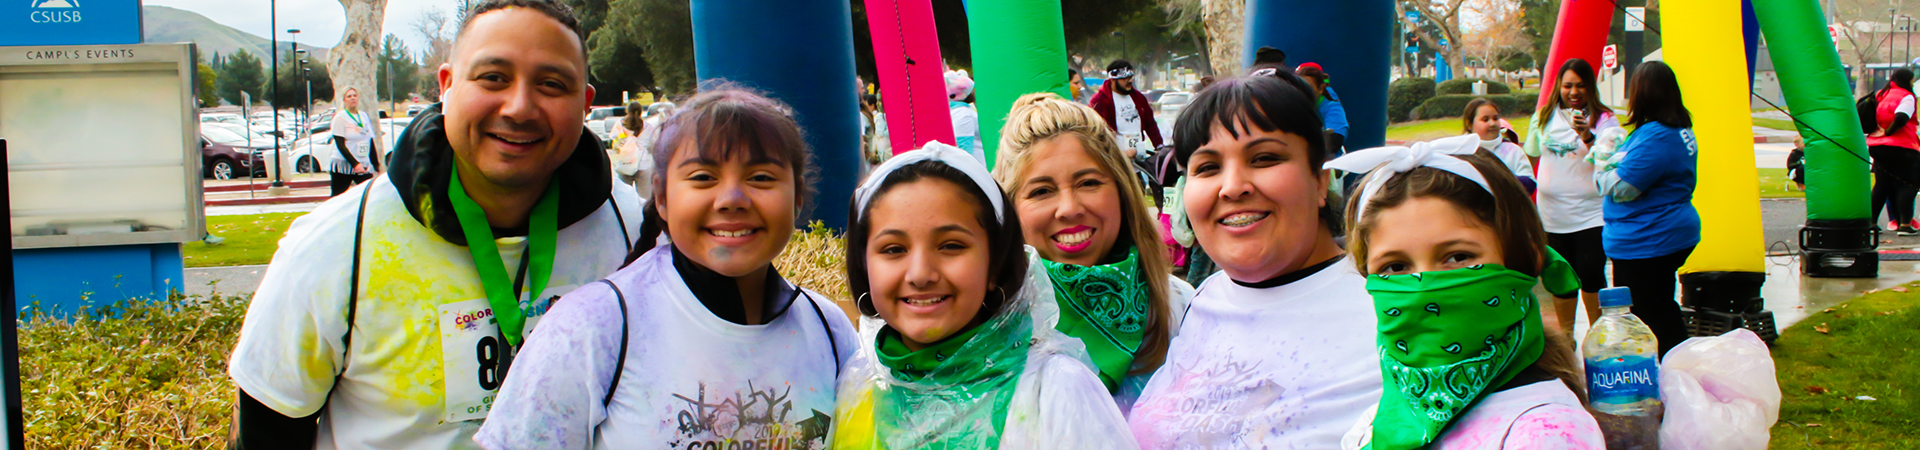  girl scouts and adults covered in colored powder and wearing green bandanas 